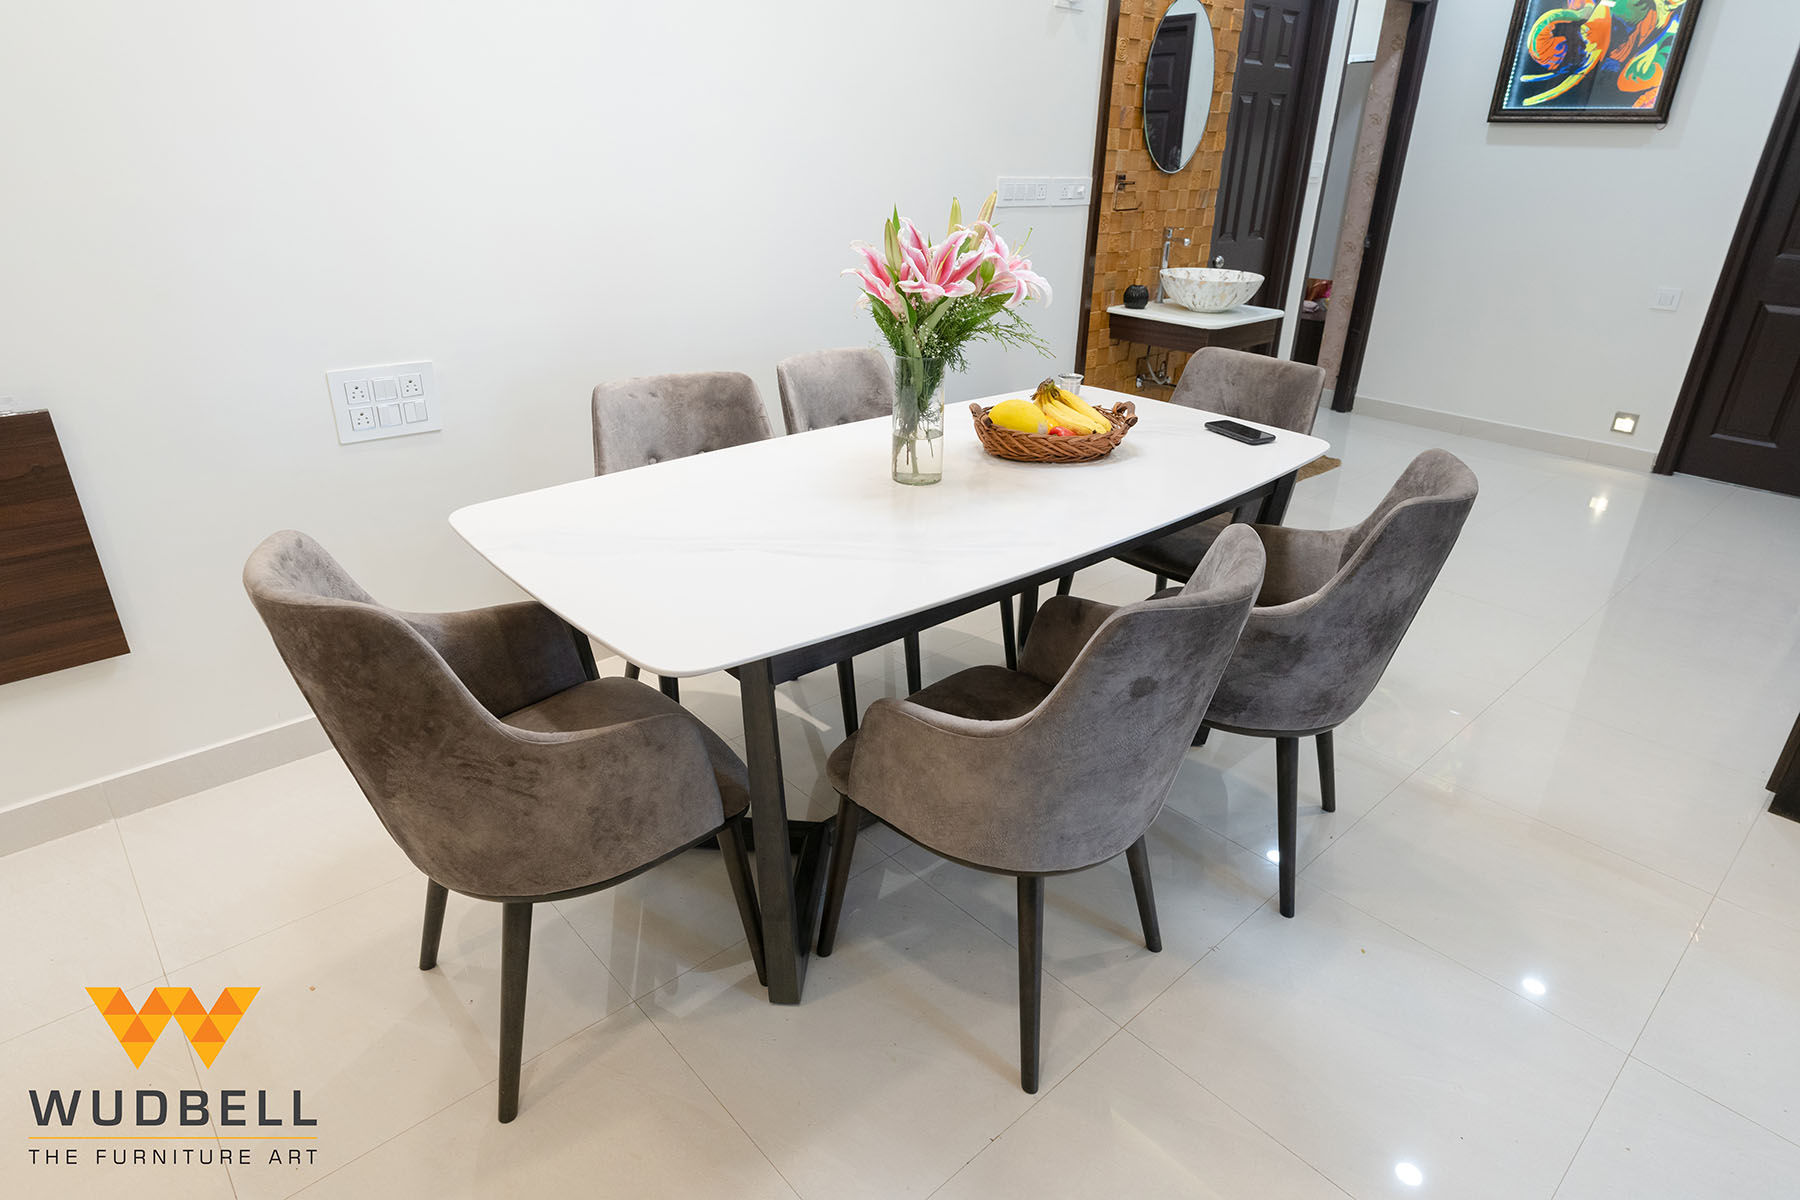 An exquisite six-seater dining table